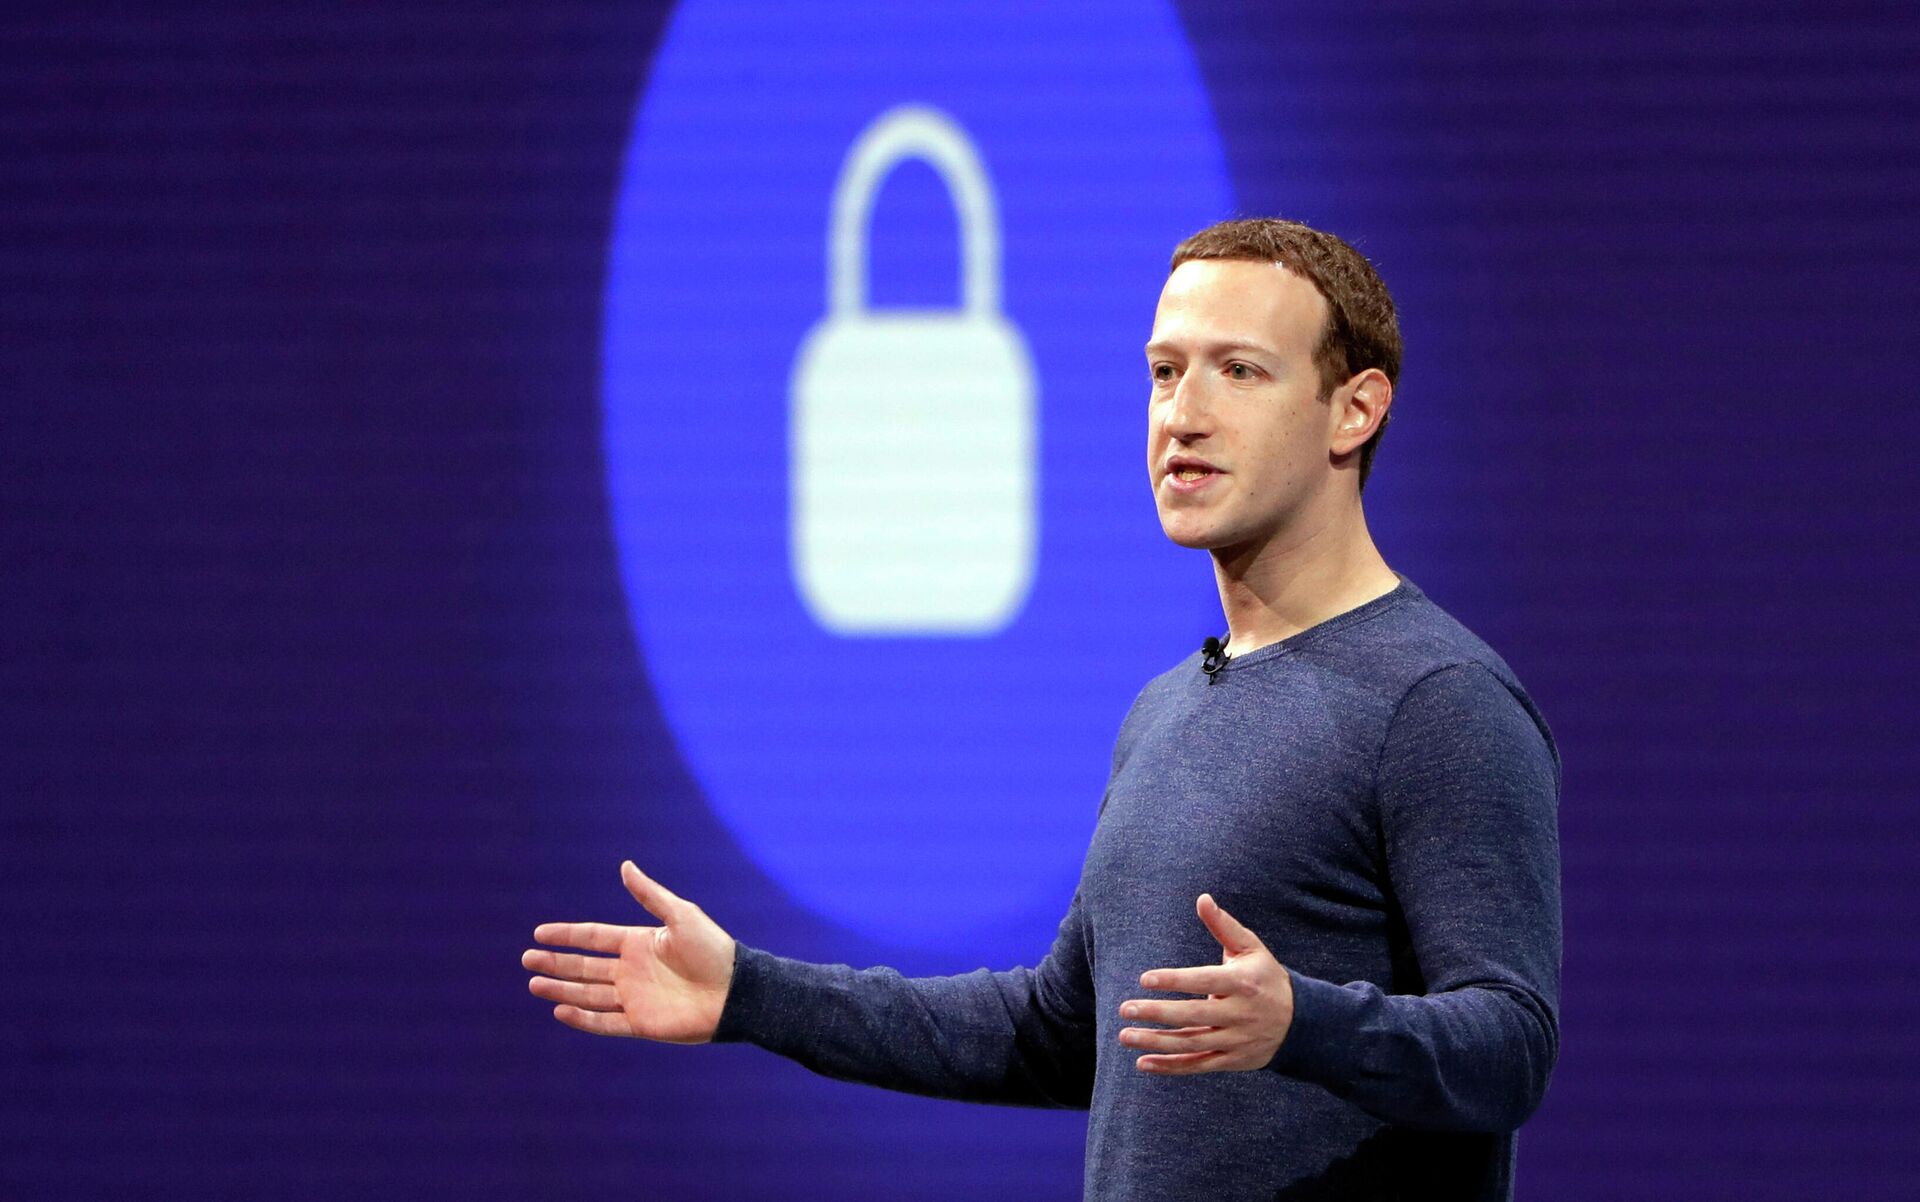 In this May 1, 2018, file photo, Facebook CEO Mark Zuckerberg delivers the keynote speech at F8, Facebook's developer conference, in San Jose, Calif. Sen. Richard Blumenthal, D-Conn., who heads the Senate Commerce subcommittee on consumer protection, called in a sharply worded letter Wednesday, Oct. 20, 2021, for Facebook founder, Zuckerberg, to testify before the panel on Instagram’s effects on children. - Sputnik International, 1920, 11.03.2022